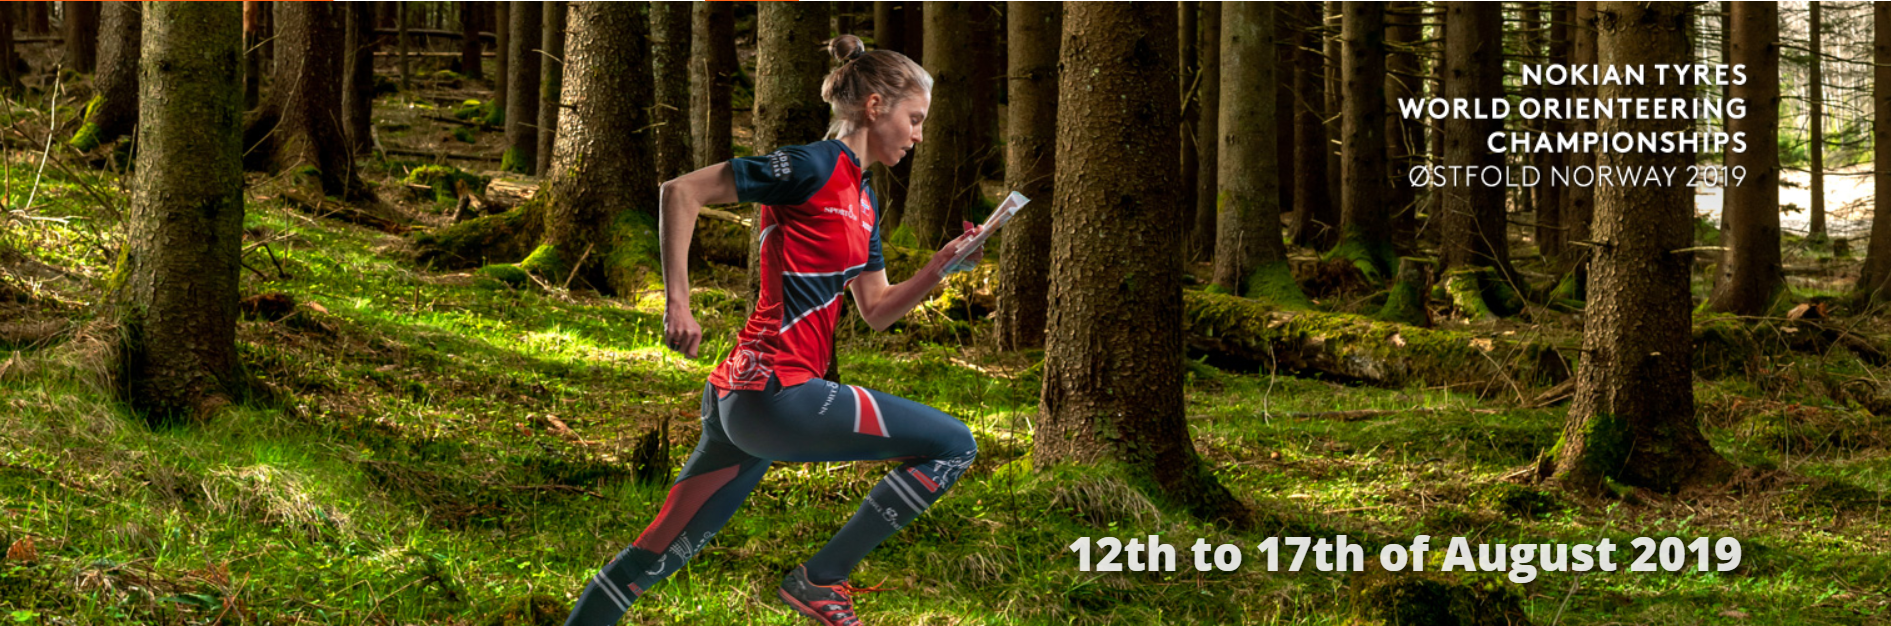 The television broadcasts from the 2019 World Orienteering Championships in the Norwegian county of Østfold will be aired live on more mainstream channels than ever ©WOC 2019